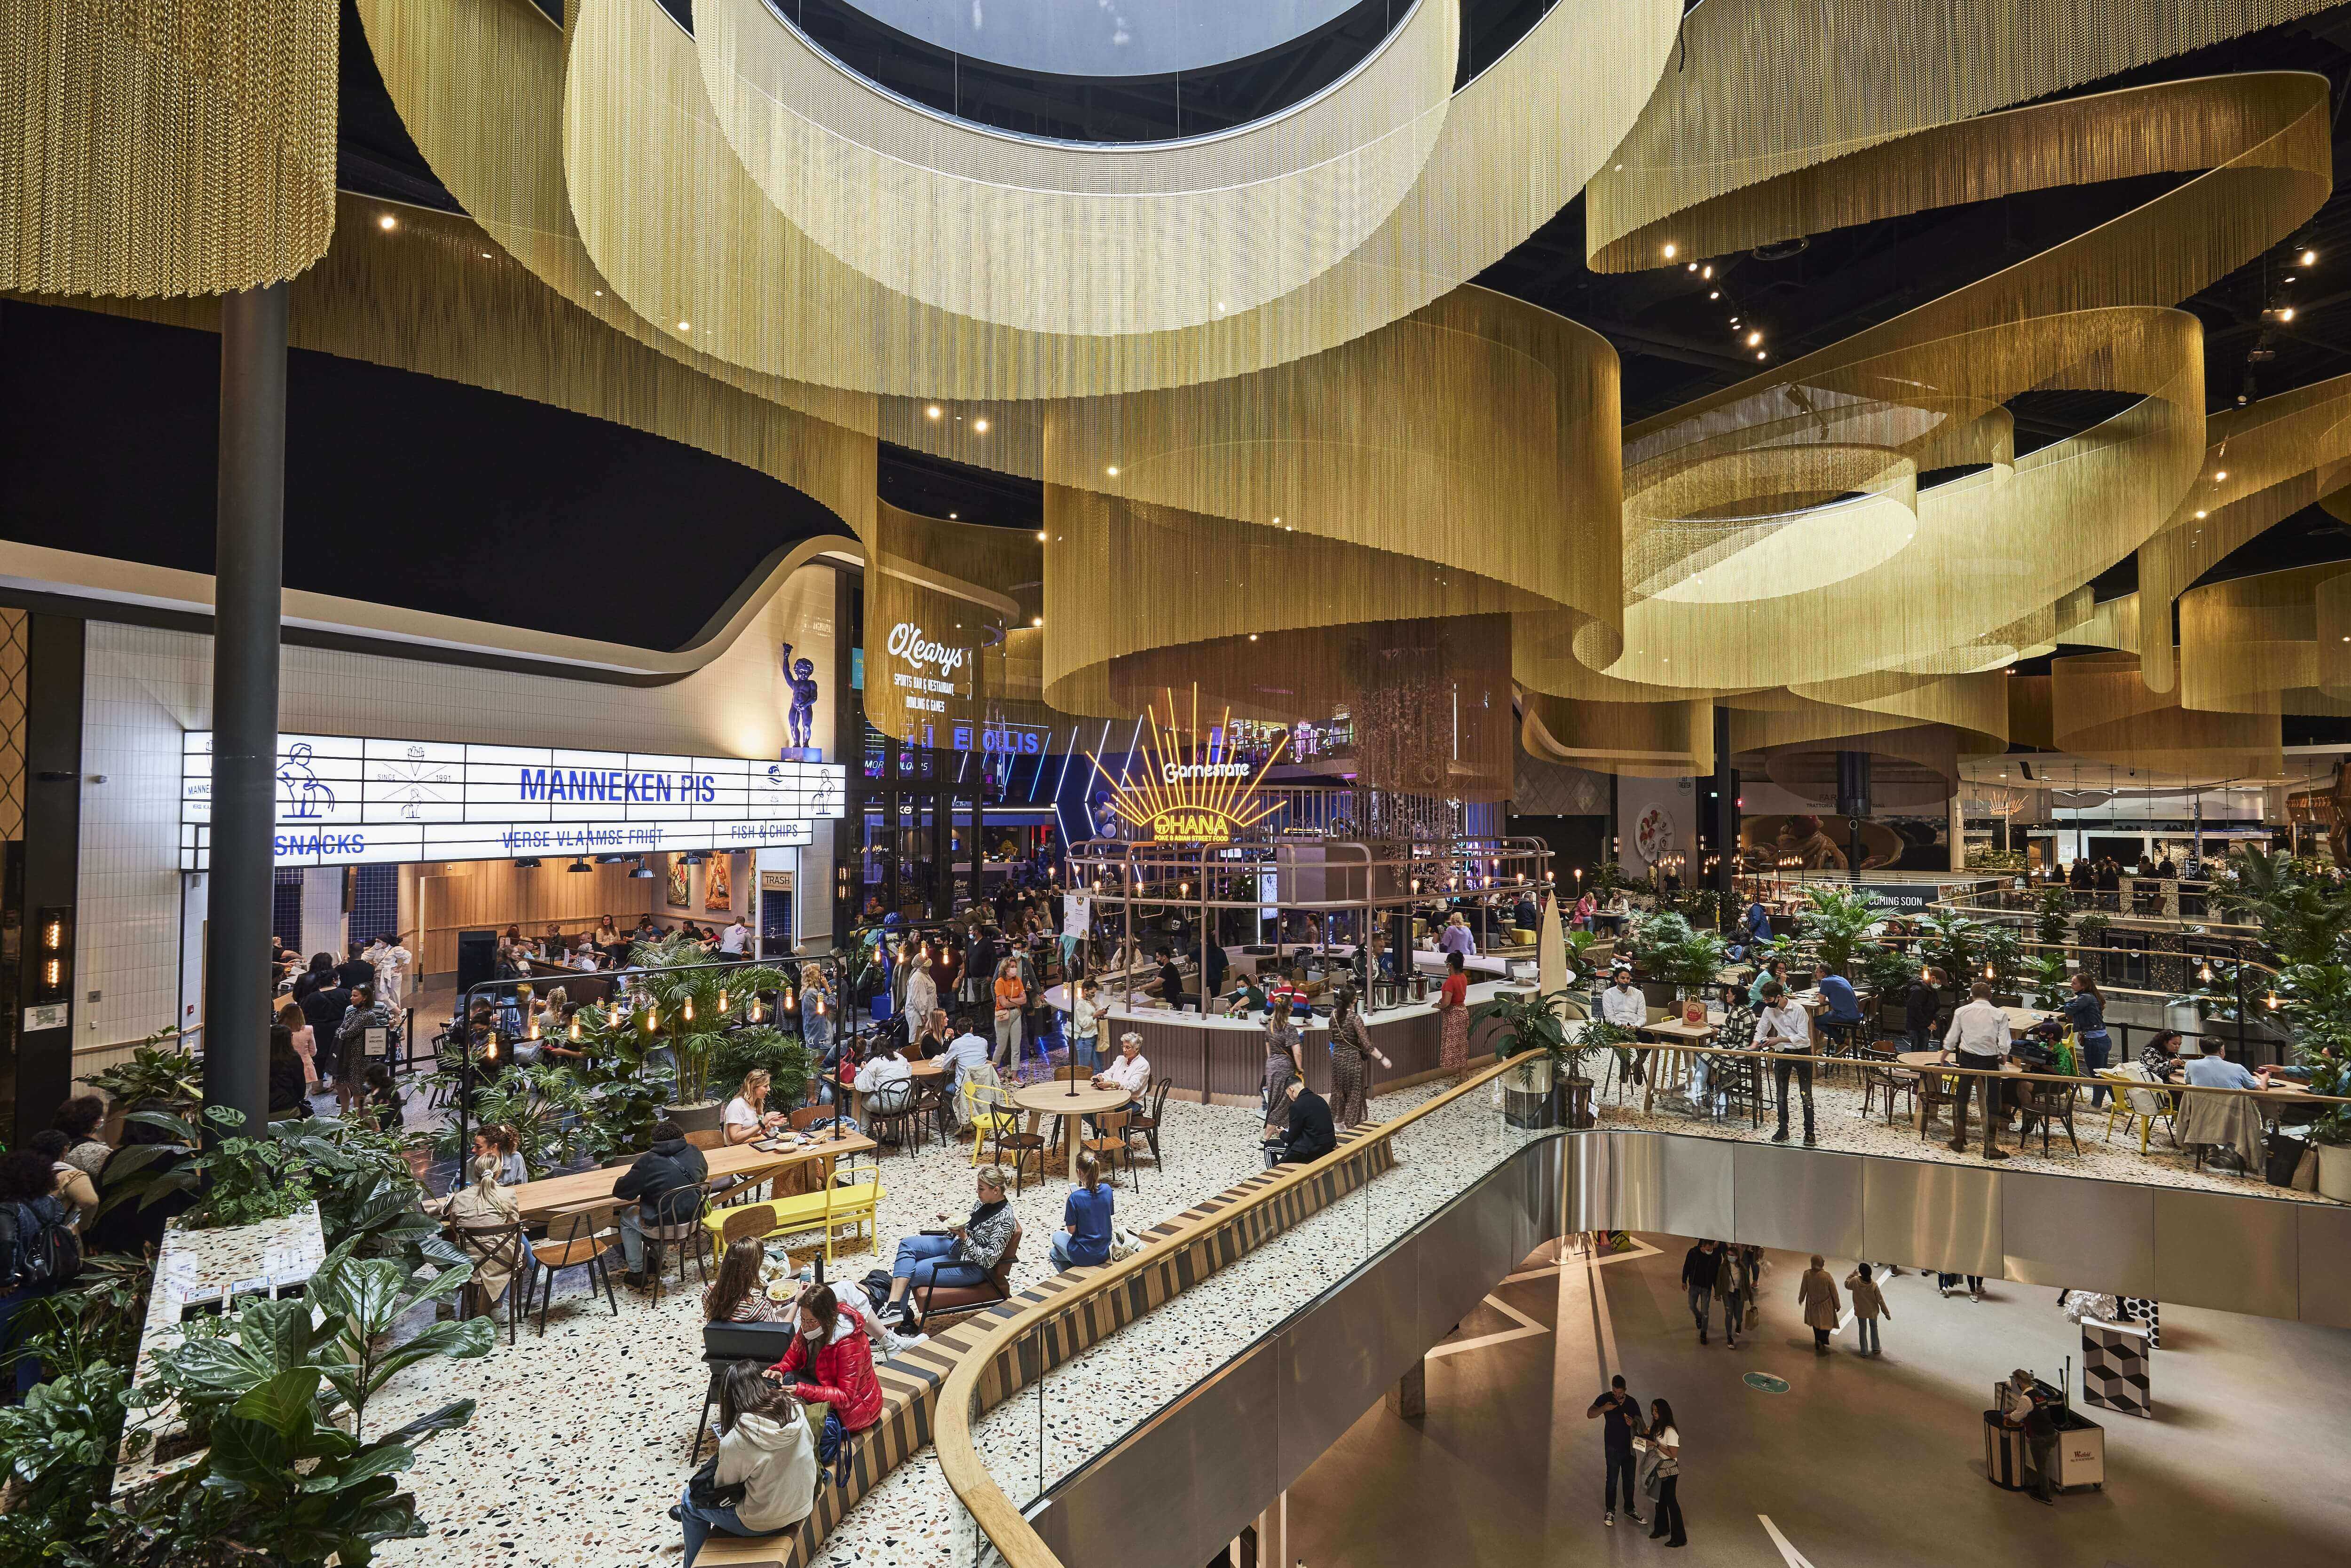 Stunning golden ceiling curtains at Westfield Mall of the Netherlands